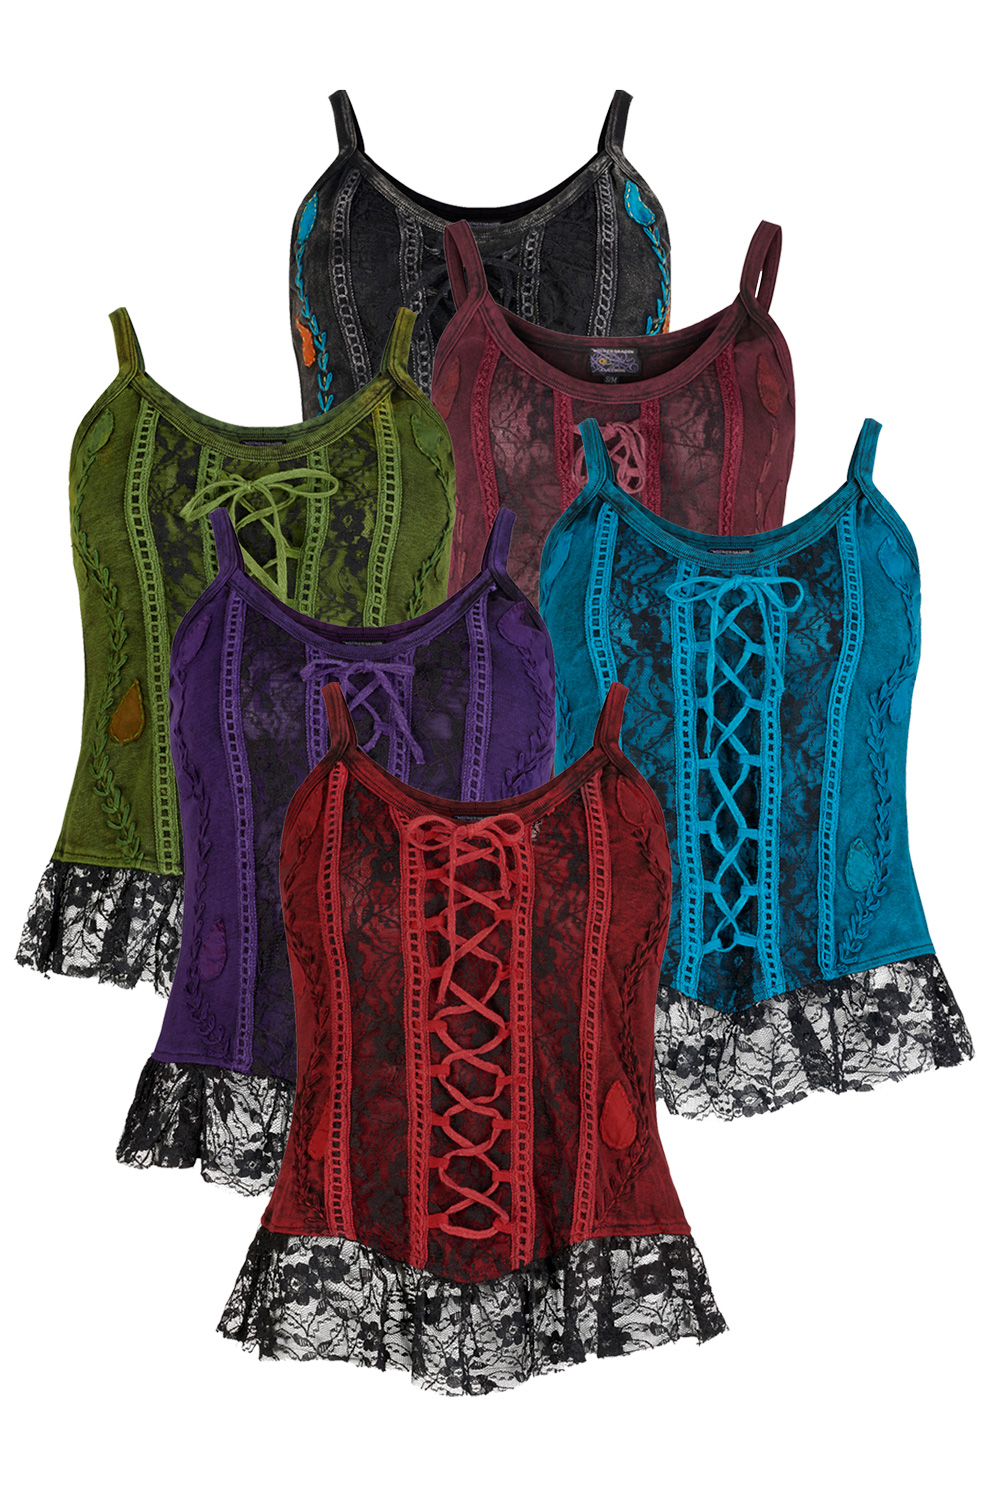 Wicked Dragon Clothing - Steampunk style corset top